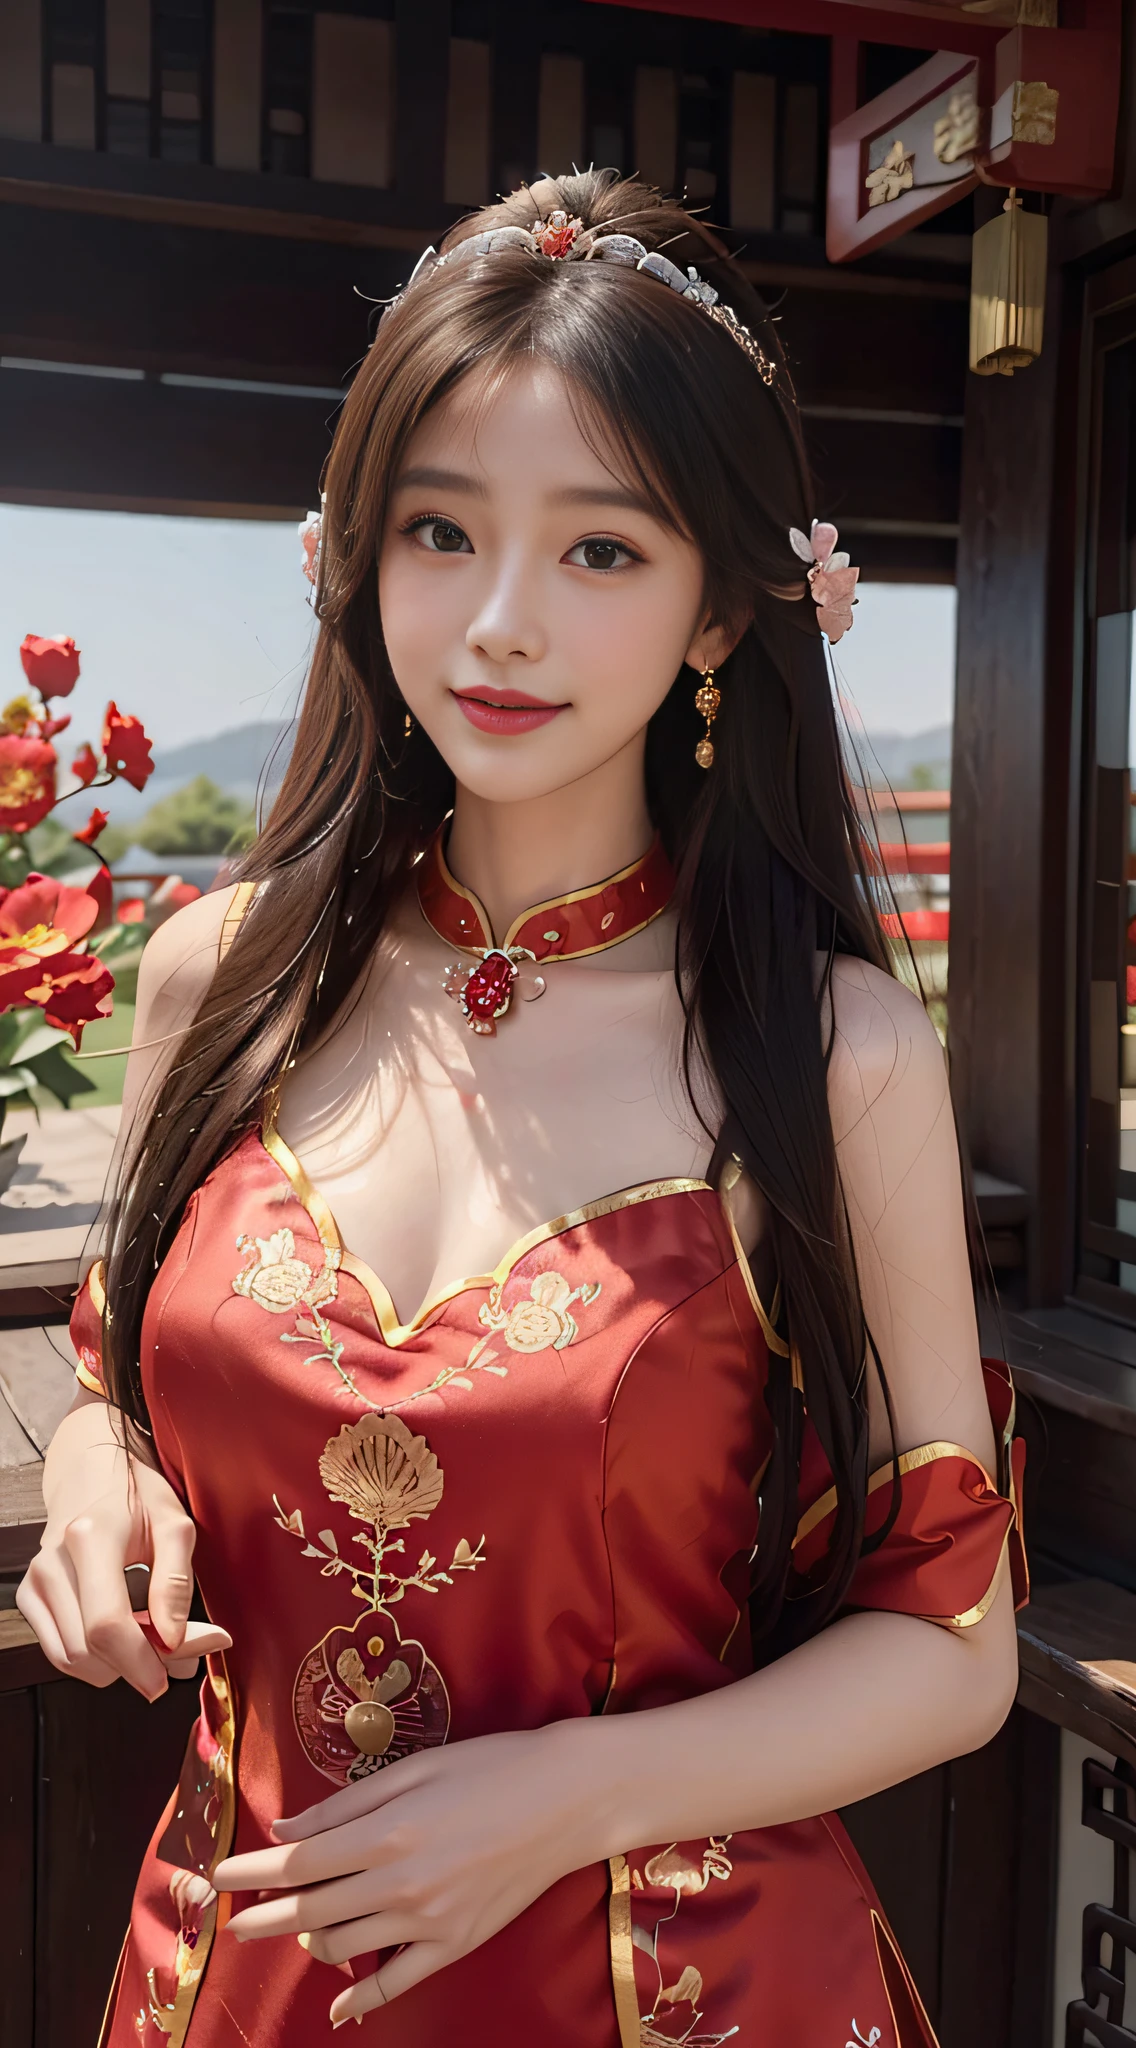 A beautyful girl，long whitr hair，(Wear a beautiful red Chinese showcase)，fine embroidery，(A delicate crown was worn over his hair)，A pair of shiny earrings hang from the ears，A beautiful necklace was worn around his neck，Sweet smiling，His face flushed，ssmile，Flowers in hand